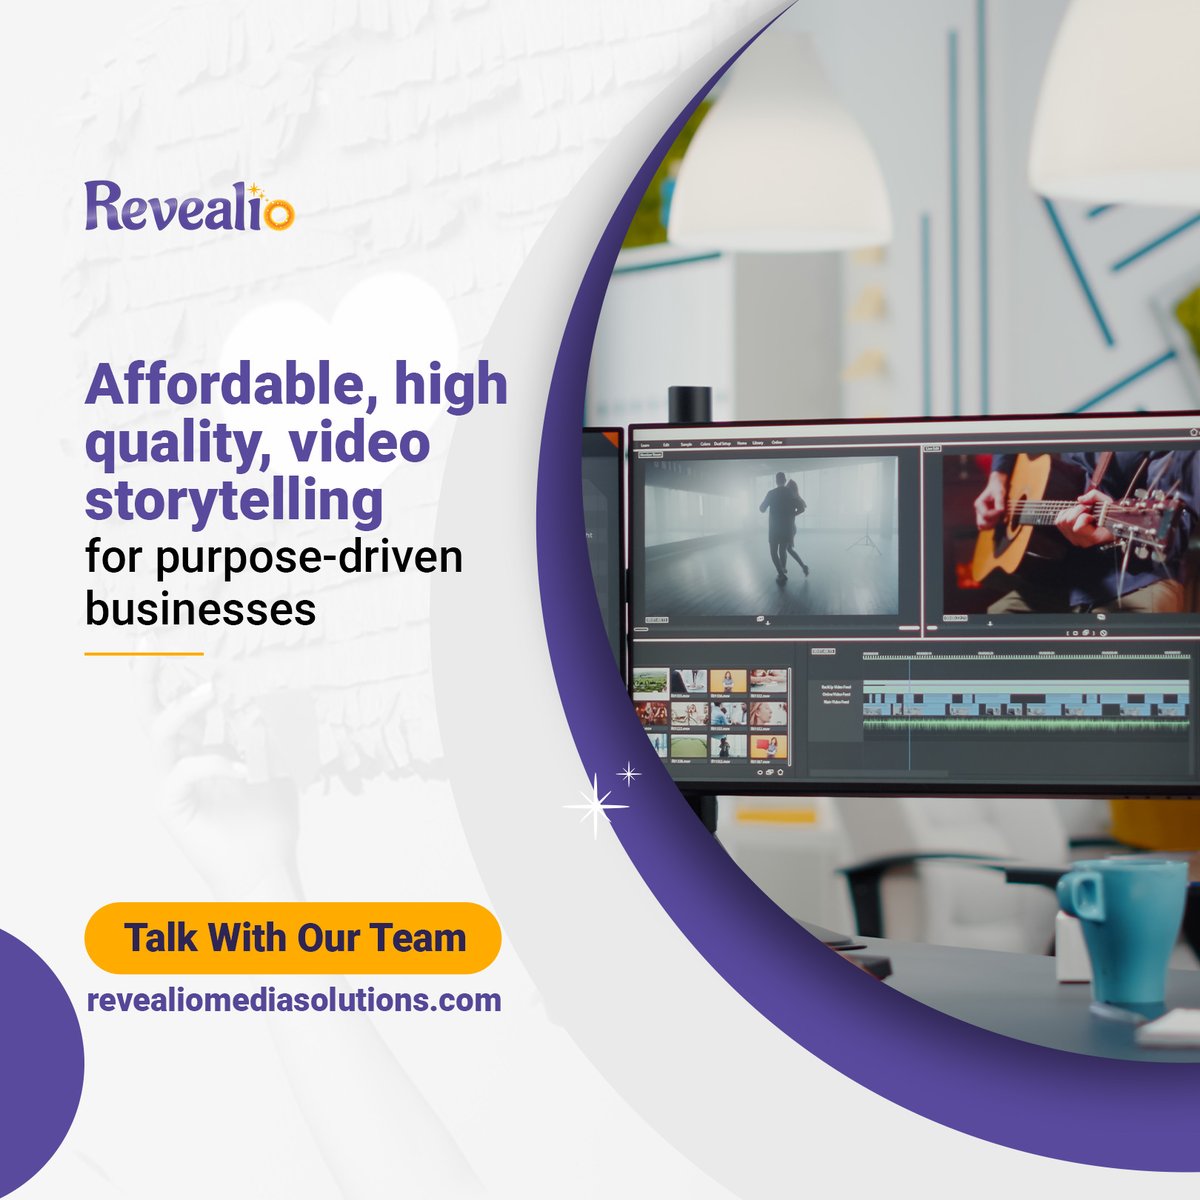 Your message matters, share it with the world now!

REVEALiO offers affordable, high quality videos for businesses.

#video #story #videostorytelling #smallbusinessvideo #nonprofitvideo #purposedriven #innovativestorytelling #revealio #uniquebusiness #storytelling #shortvideo